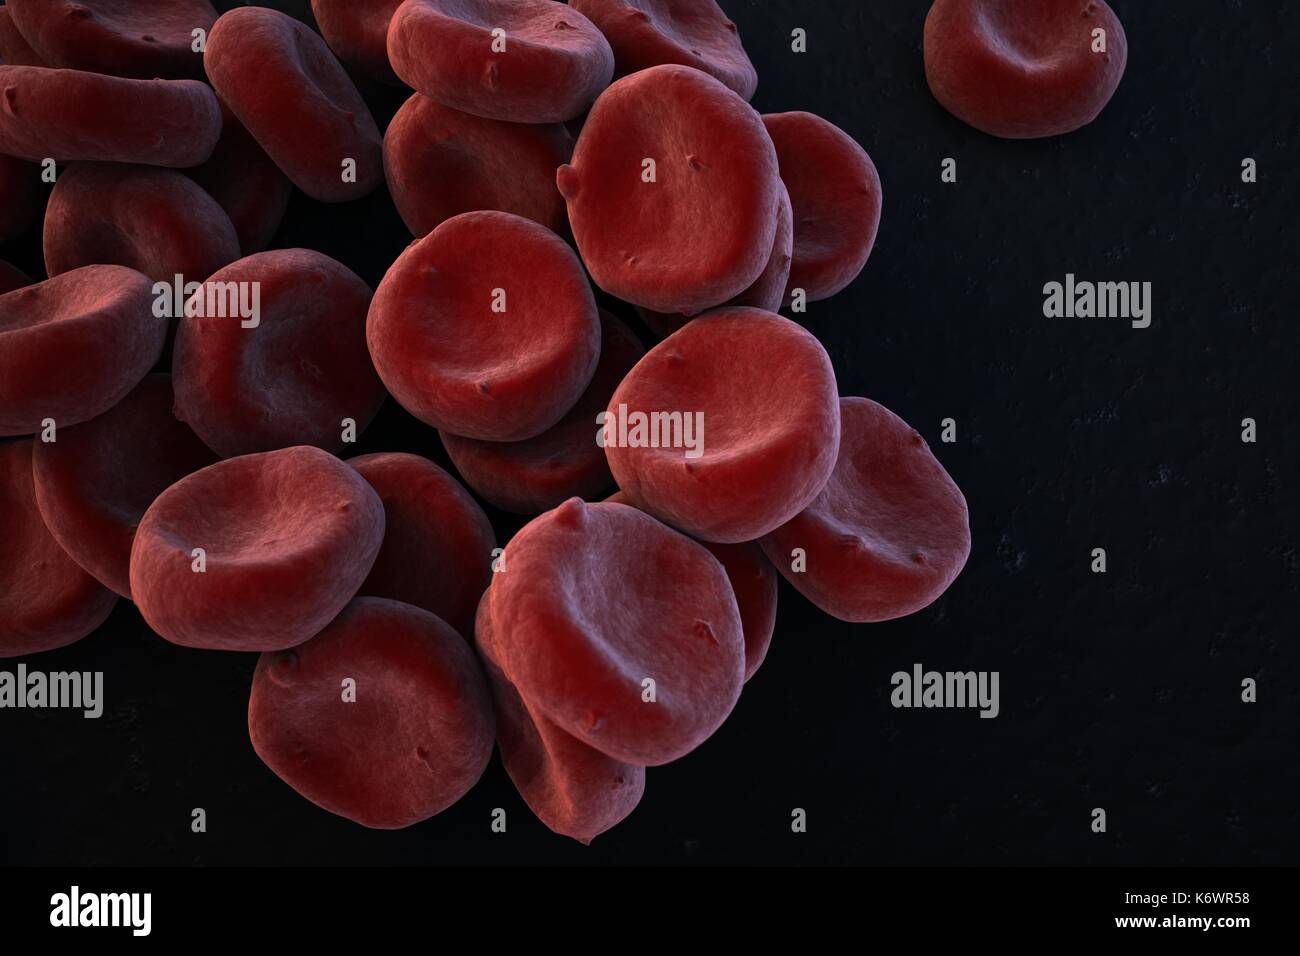 Close-up of oxygenated Red Blood Cells (Erythrocytes) piled up, SEM (scanning Electron Microscope) false rich red colored stylized depiction. Stock Photo